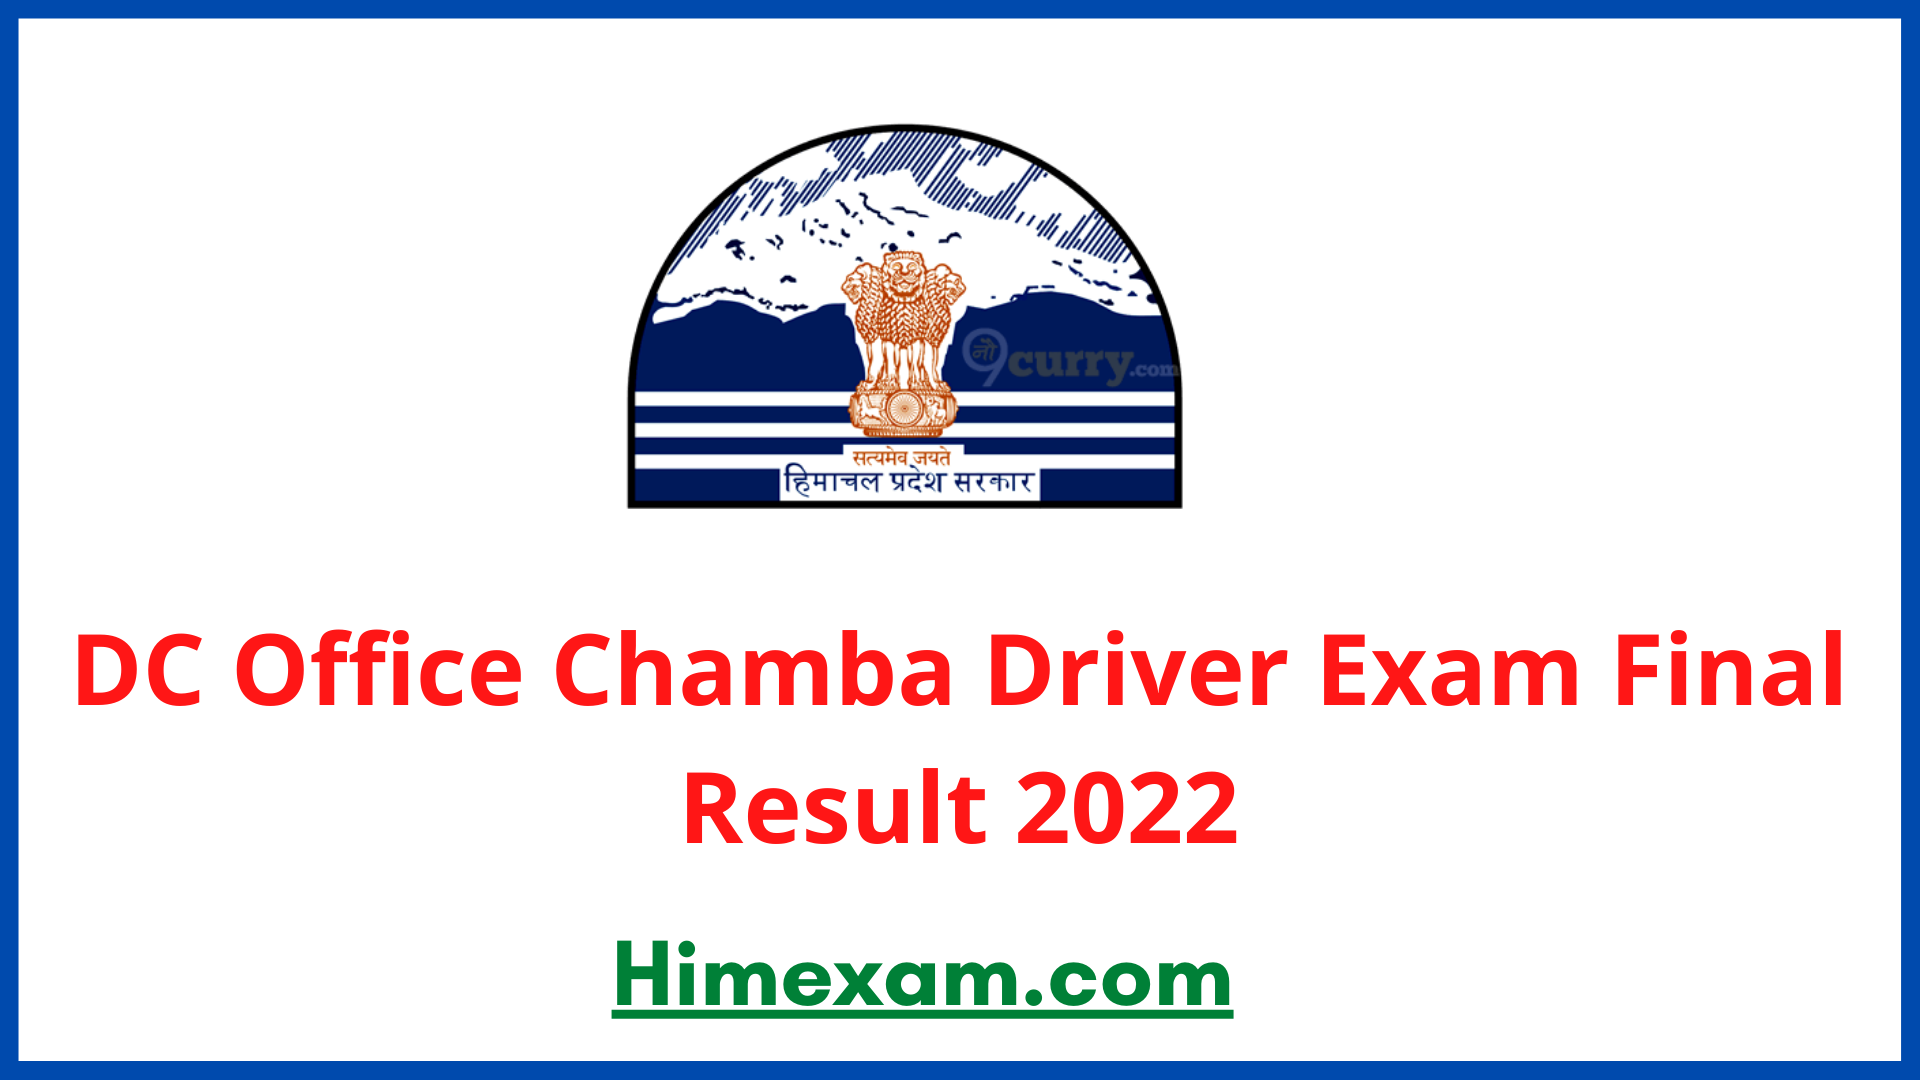 DC Office Chamba Driver Exam Final Result 2022